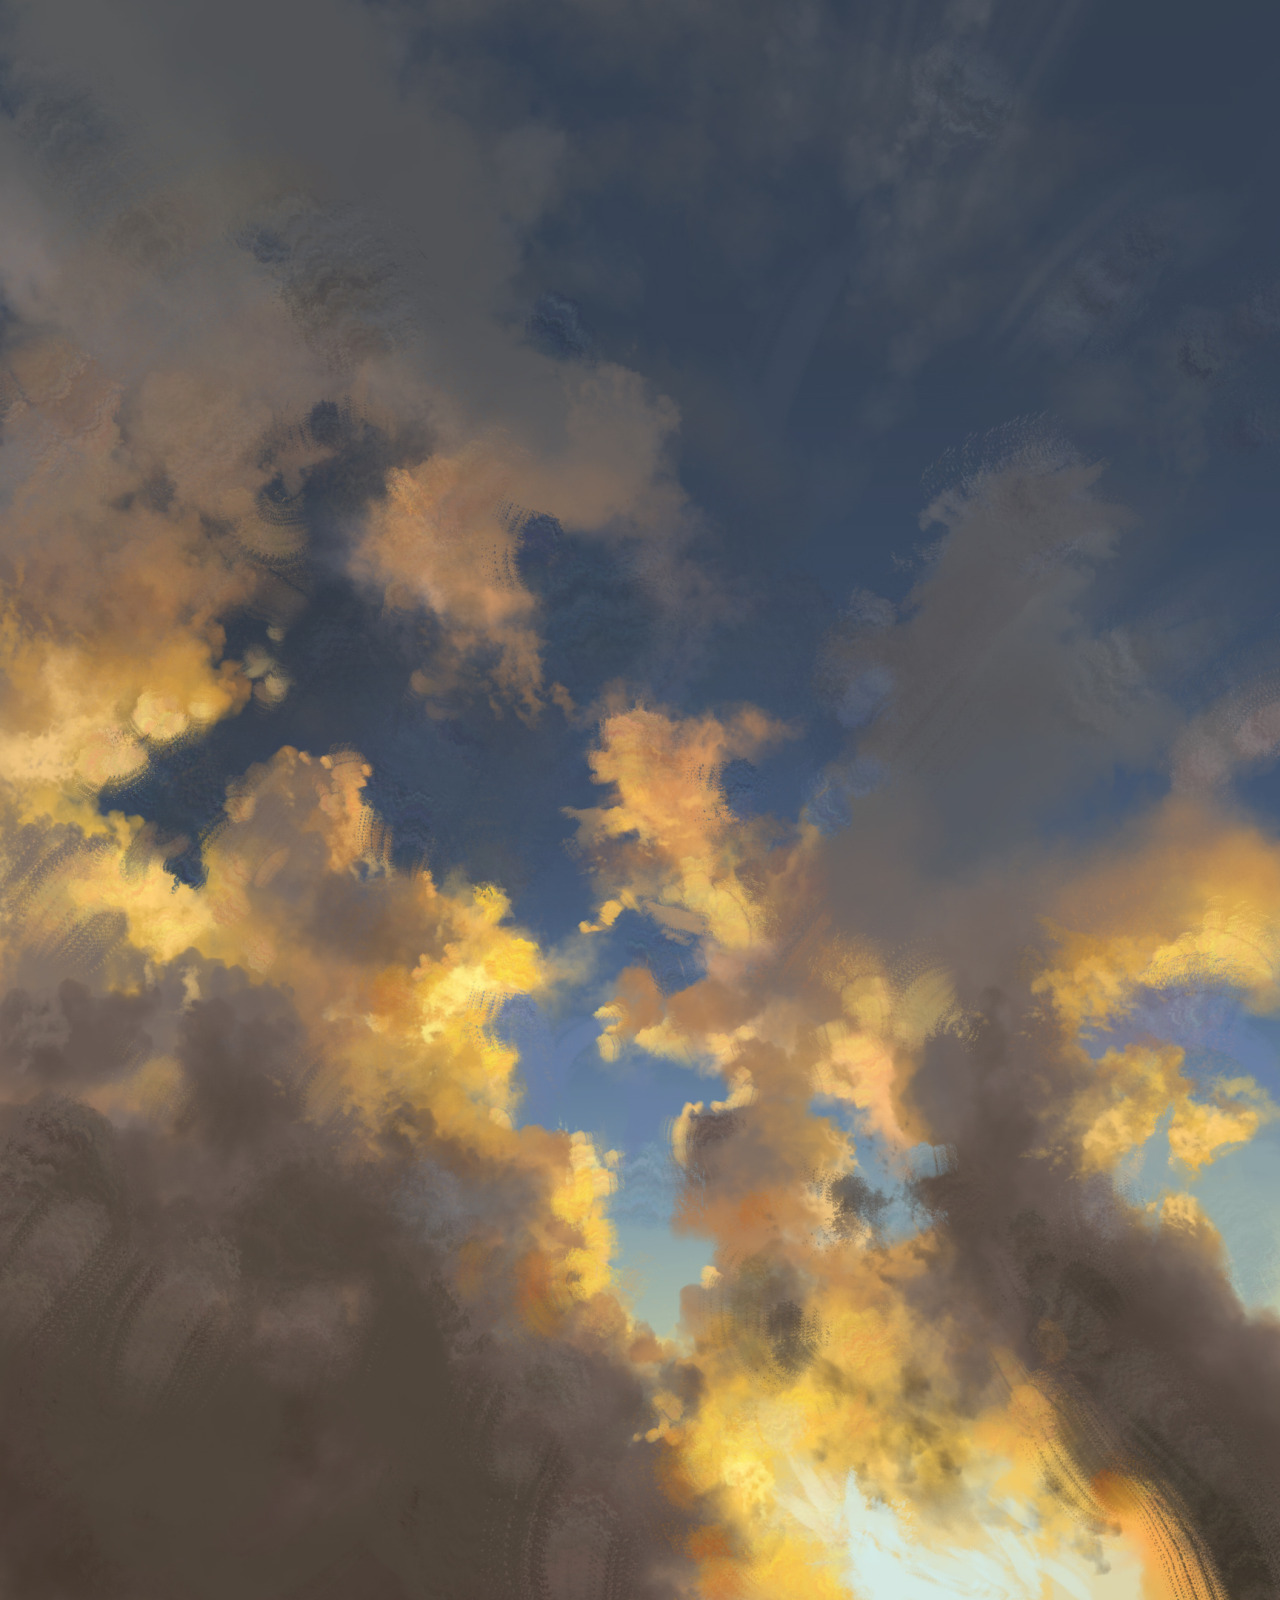 A digital painting of a sunset sky